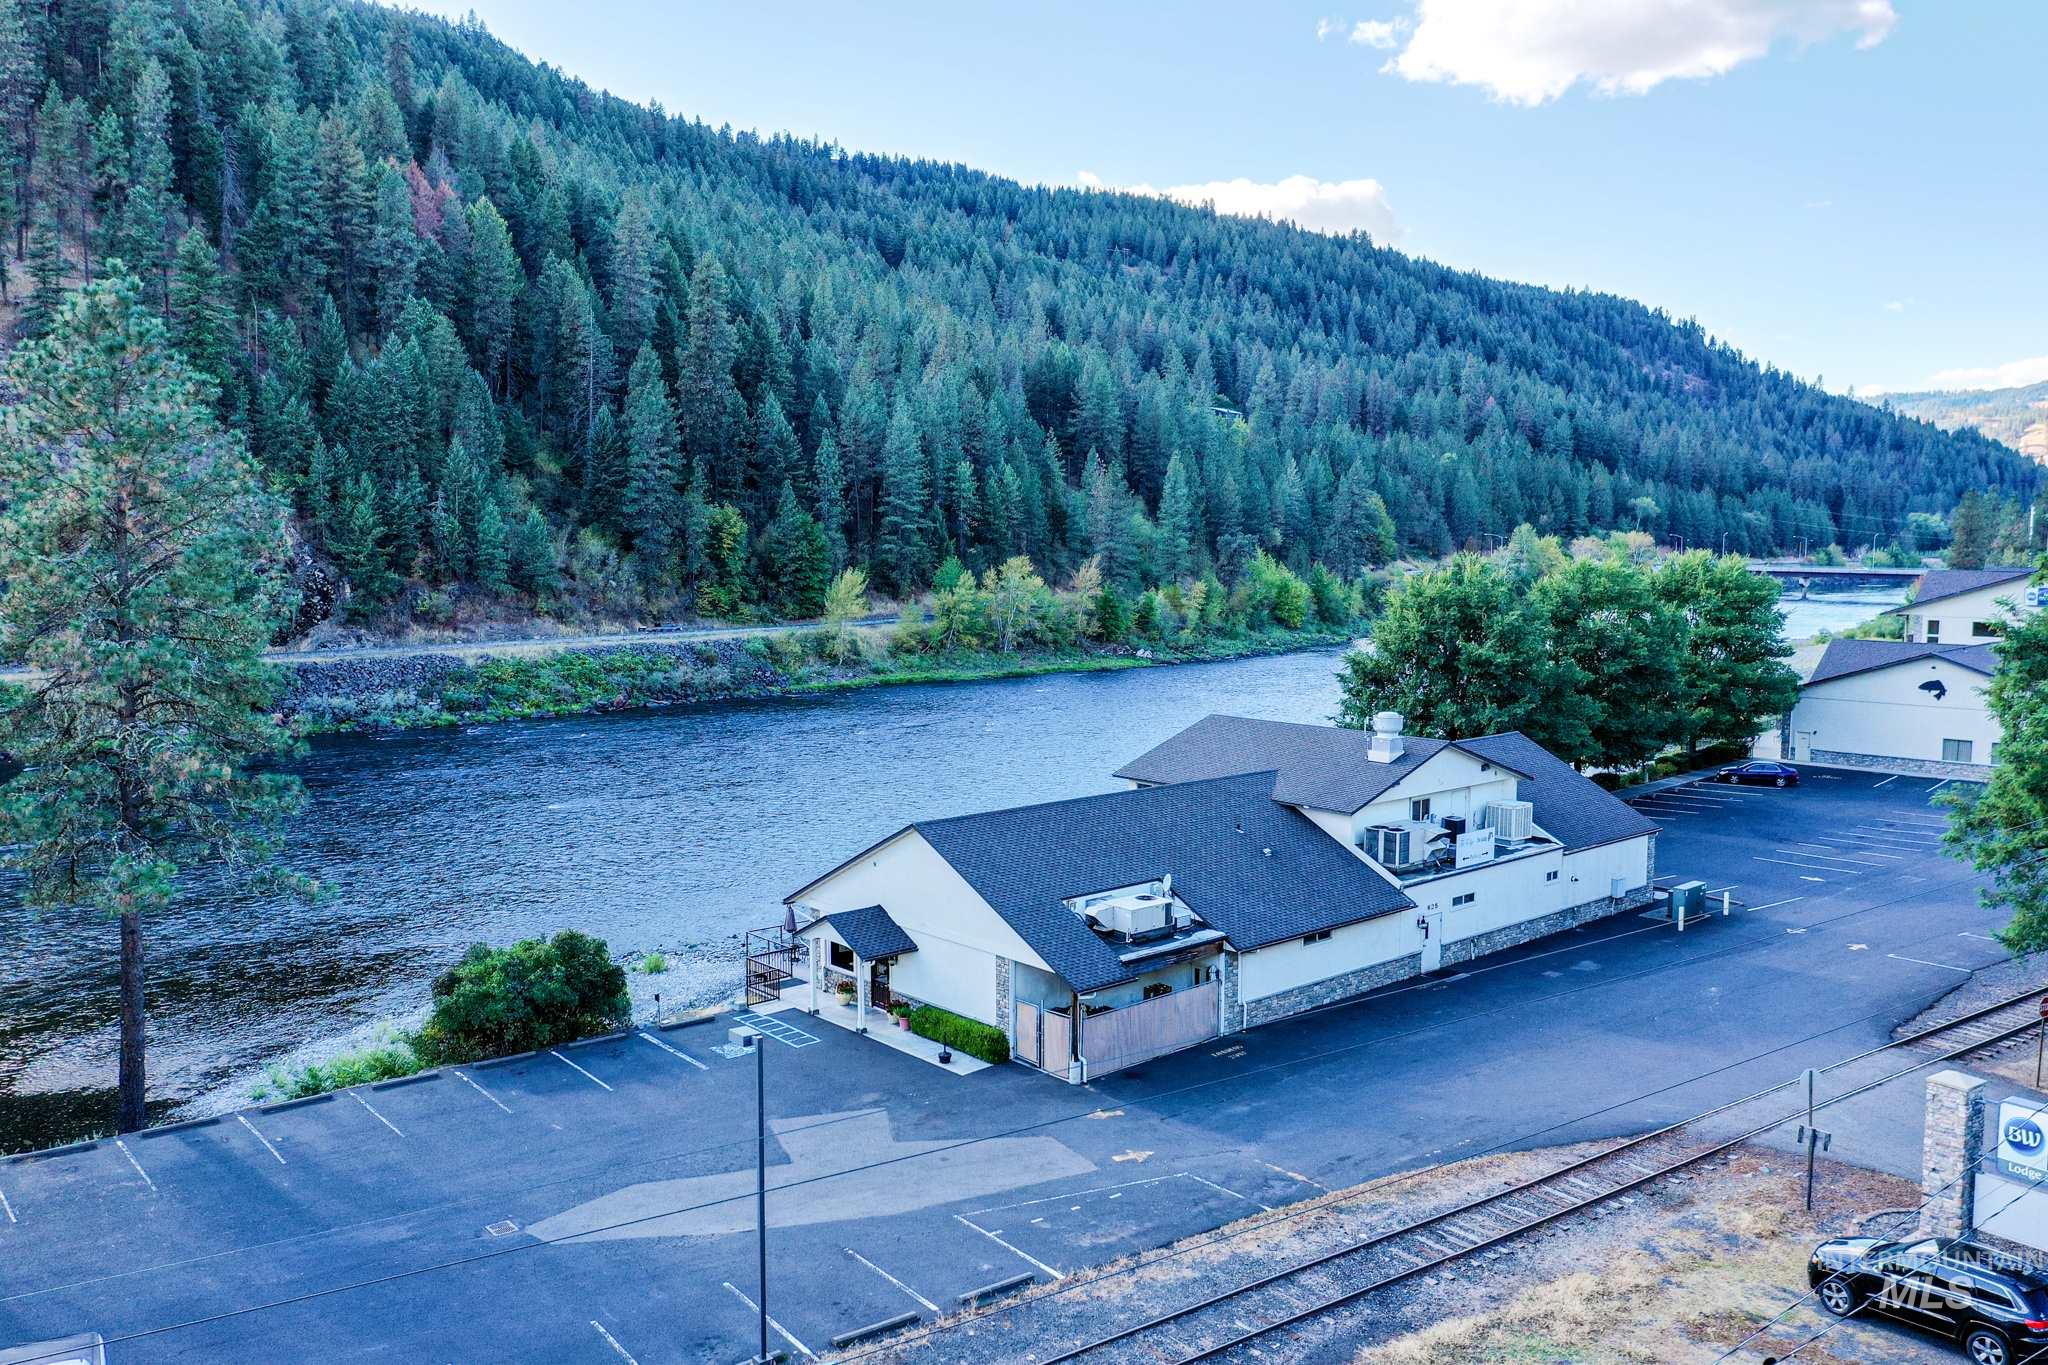 625 Main St, Orofino, Idaho 83544, Business/Commercial For Sale, Price $900,000,MLS 98784073